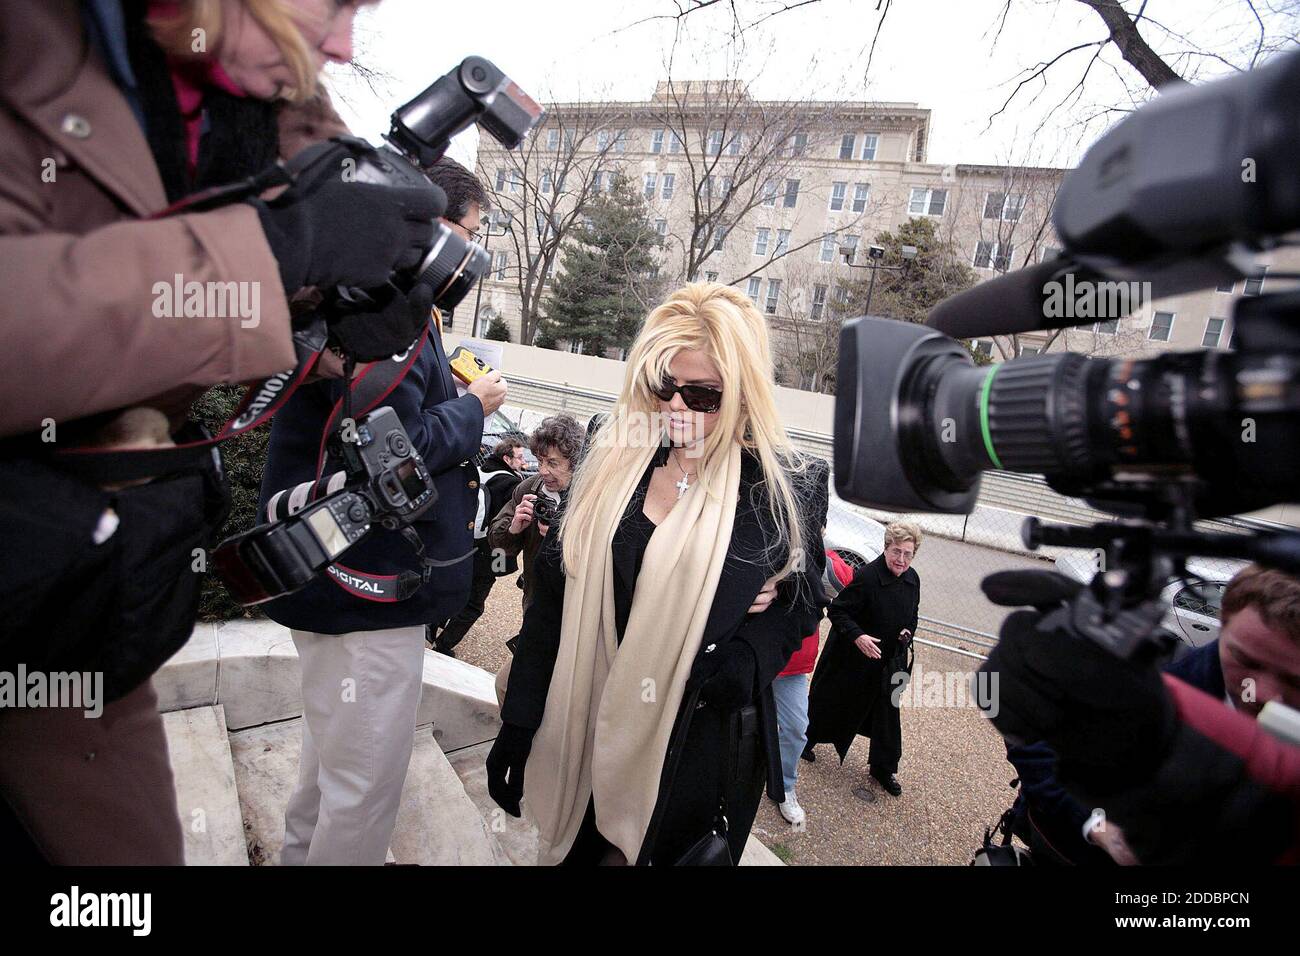 NO FILM, NO VIDEO, NO TV, NO DOCUMENTARY - Anna Nicole Smith enters the side door of the U.S. Supreme Court, in Washington, DC, USA, on February 28, 2006. Smith's case is to determine whether state or federal courts have jurisdiction over her claim for money from the estate of her late husband, J. Howard Marshall, II. Photo by Chuck Kennedy/KRT/ABACAPRESS.COM Stock Photo